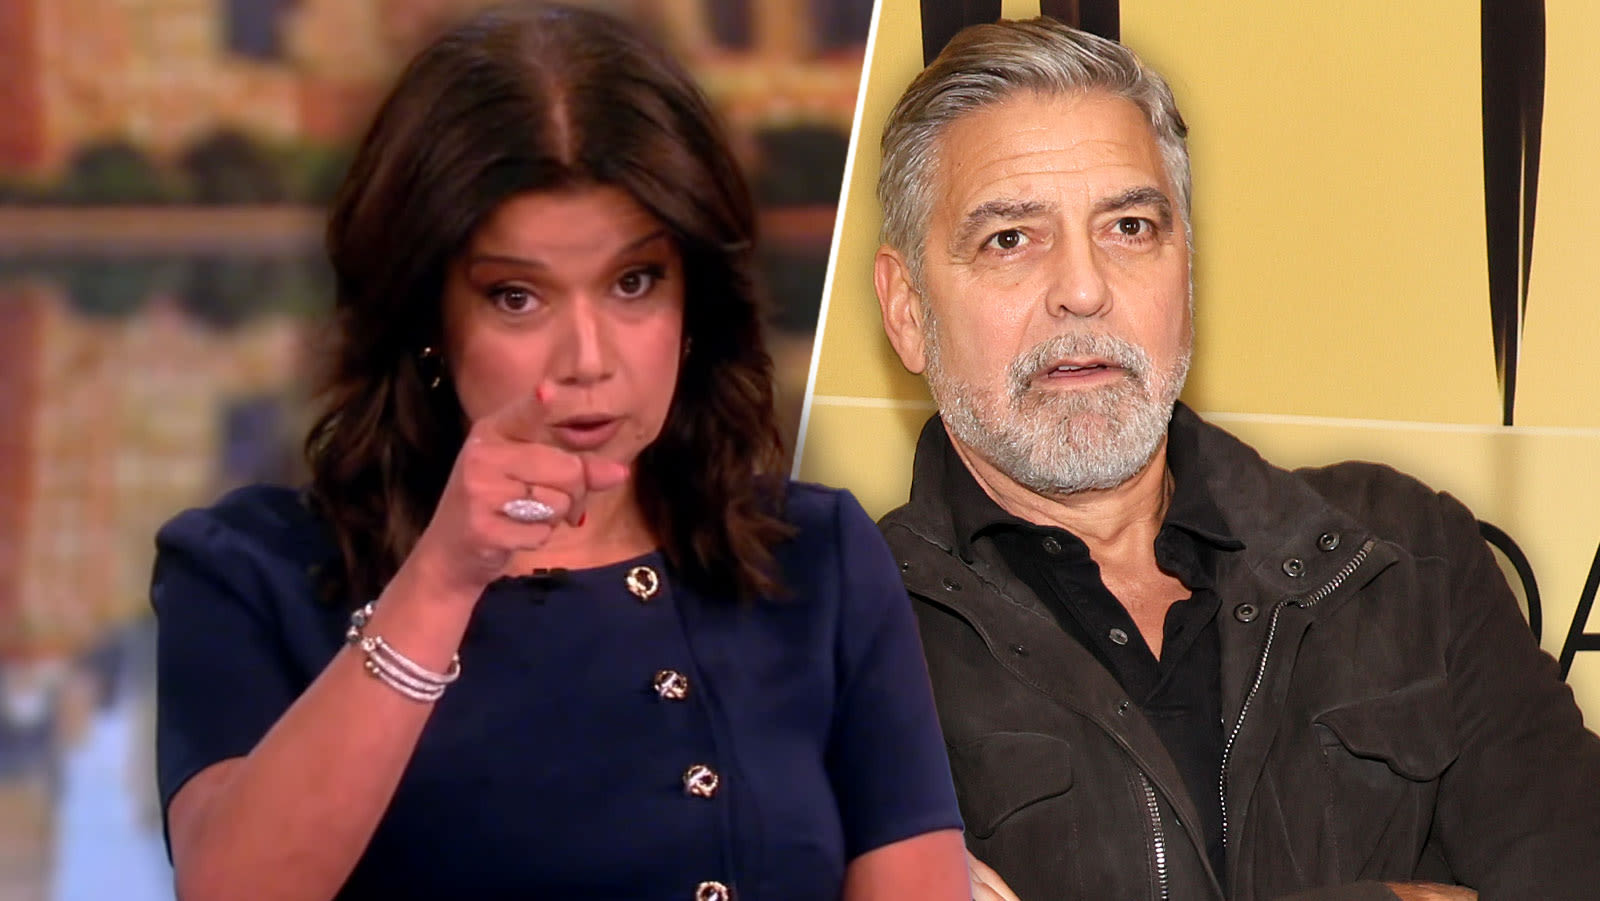 ‘The View’s Ana Navarro Calls On George Clooney To “Come Back With A Big Check” For Democrats After...